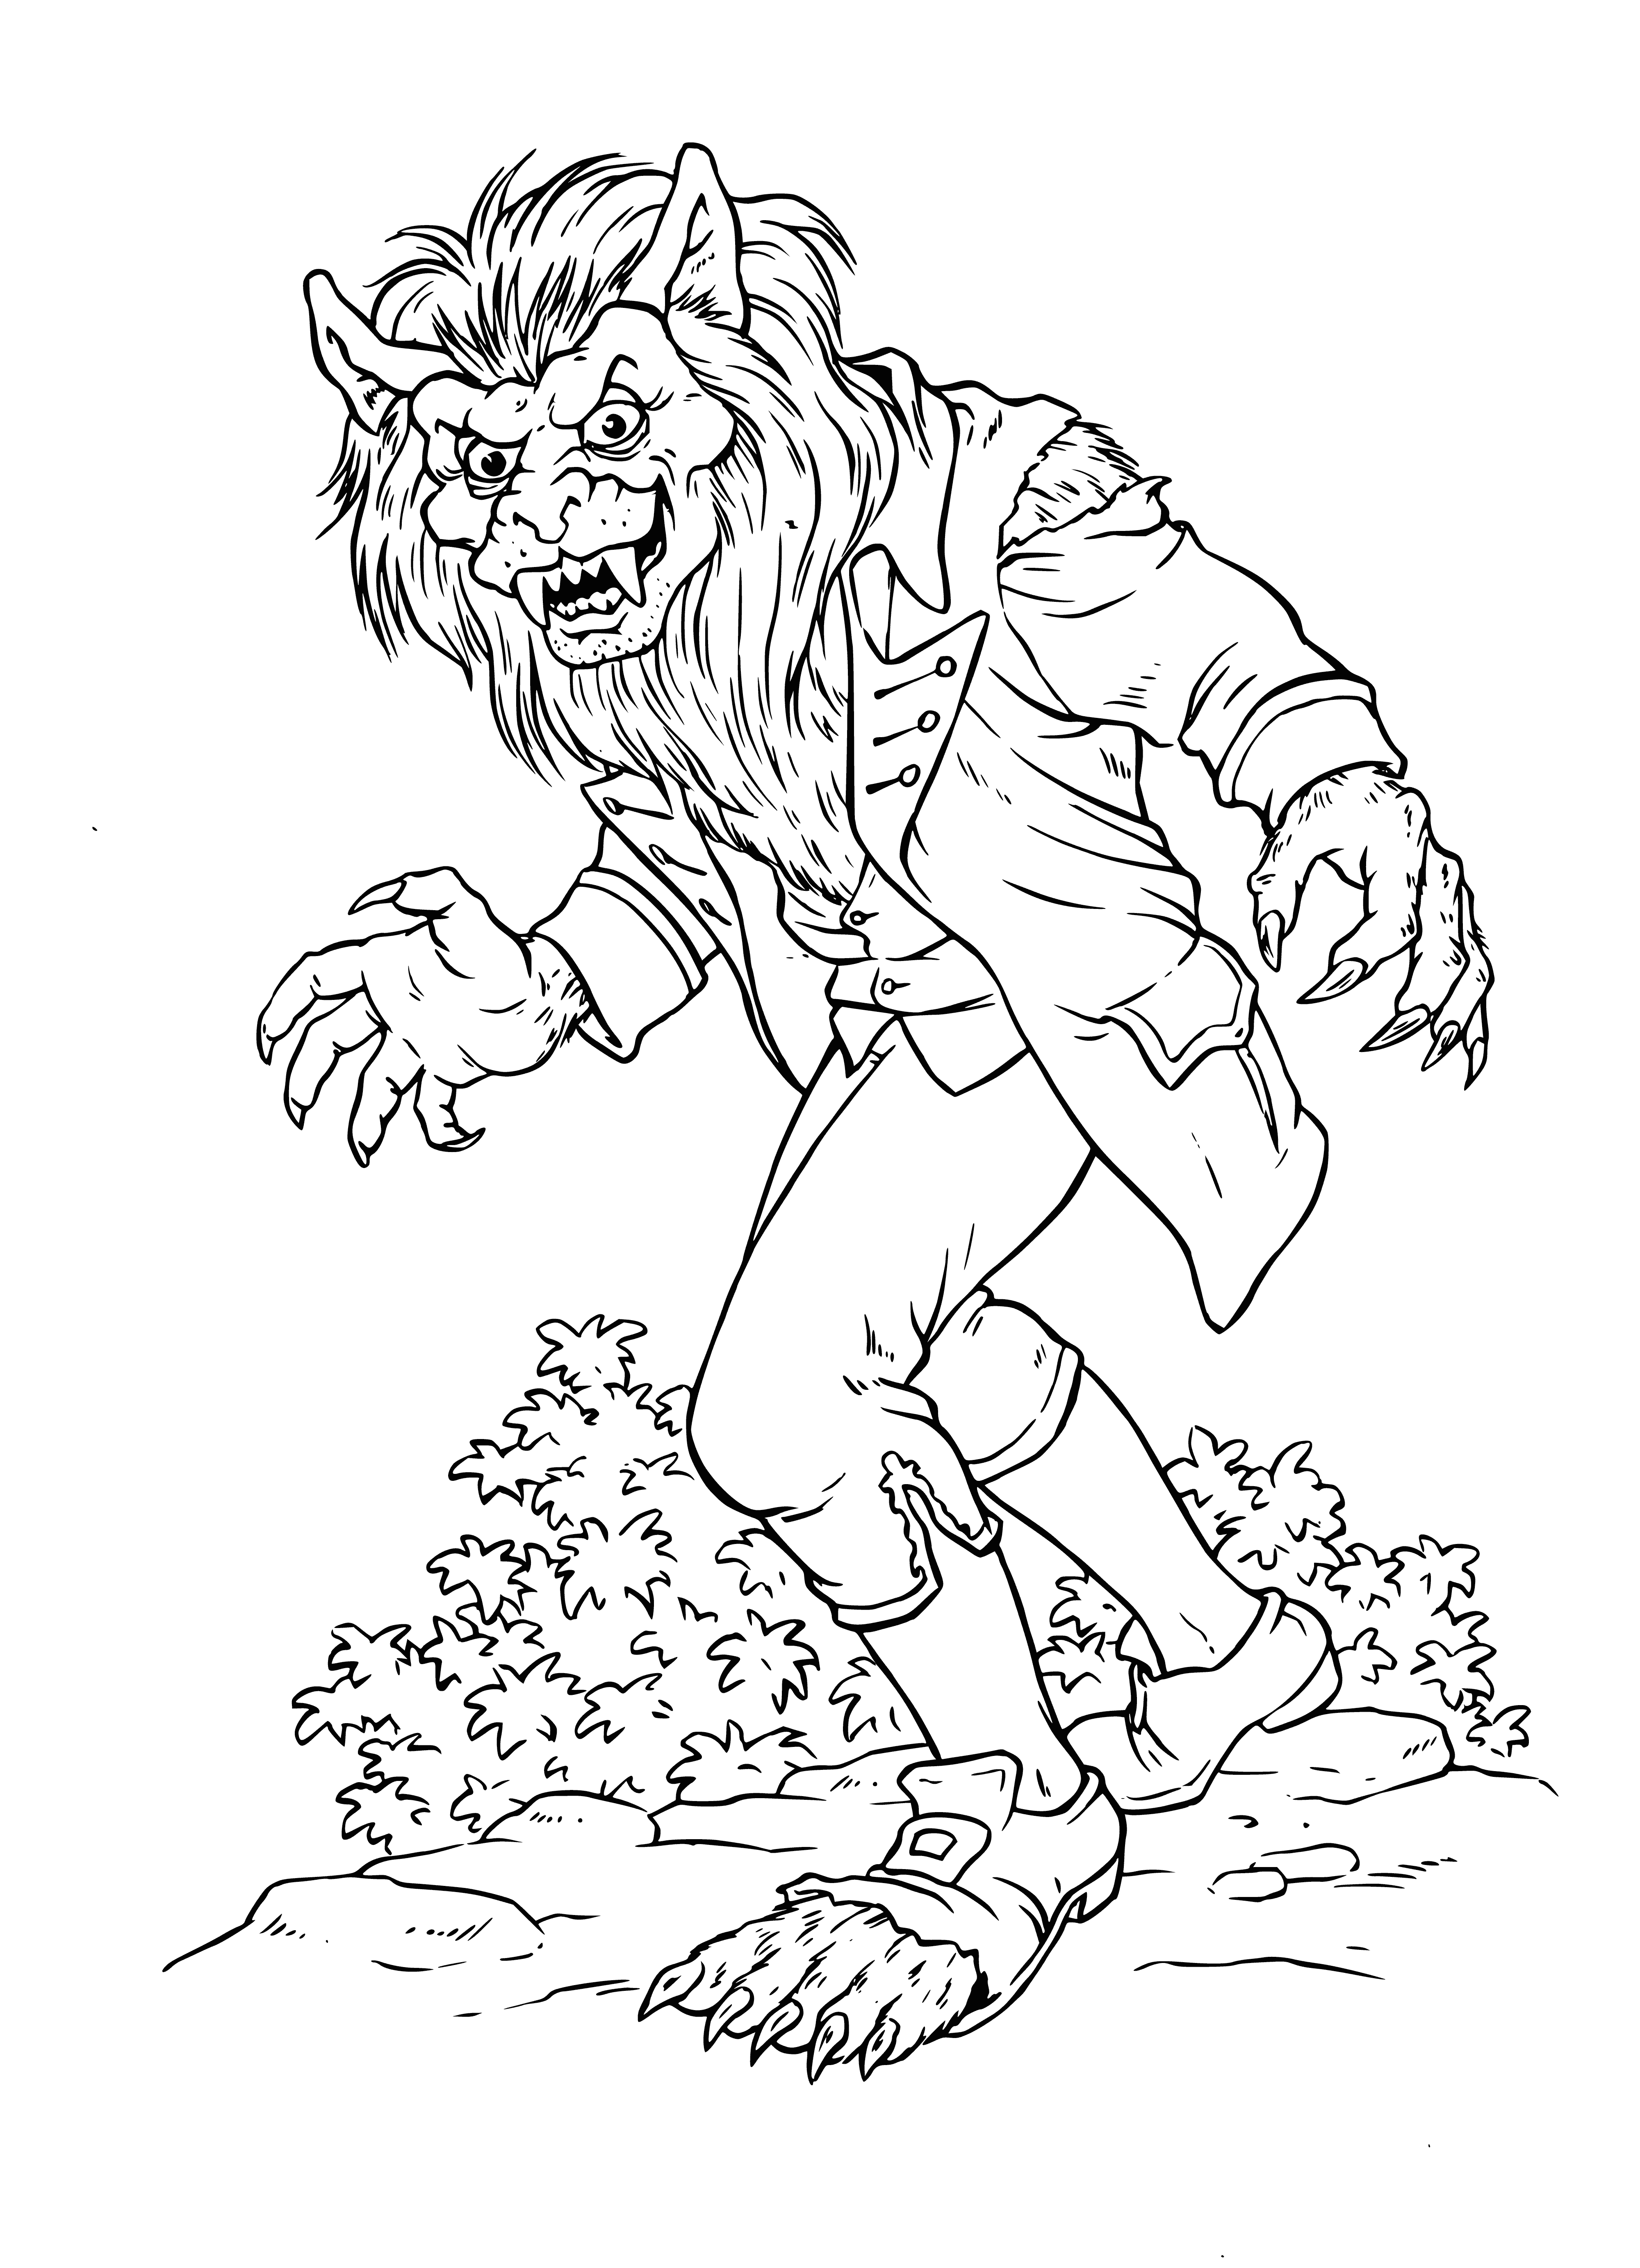 coloring page: Coloring page of werewolf & other monsters surrounded by vampire, witch, skeleton & spider. Yellow eyes, gray fur, & sharp teeth! #coloringpages